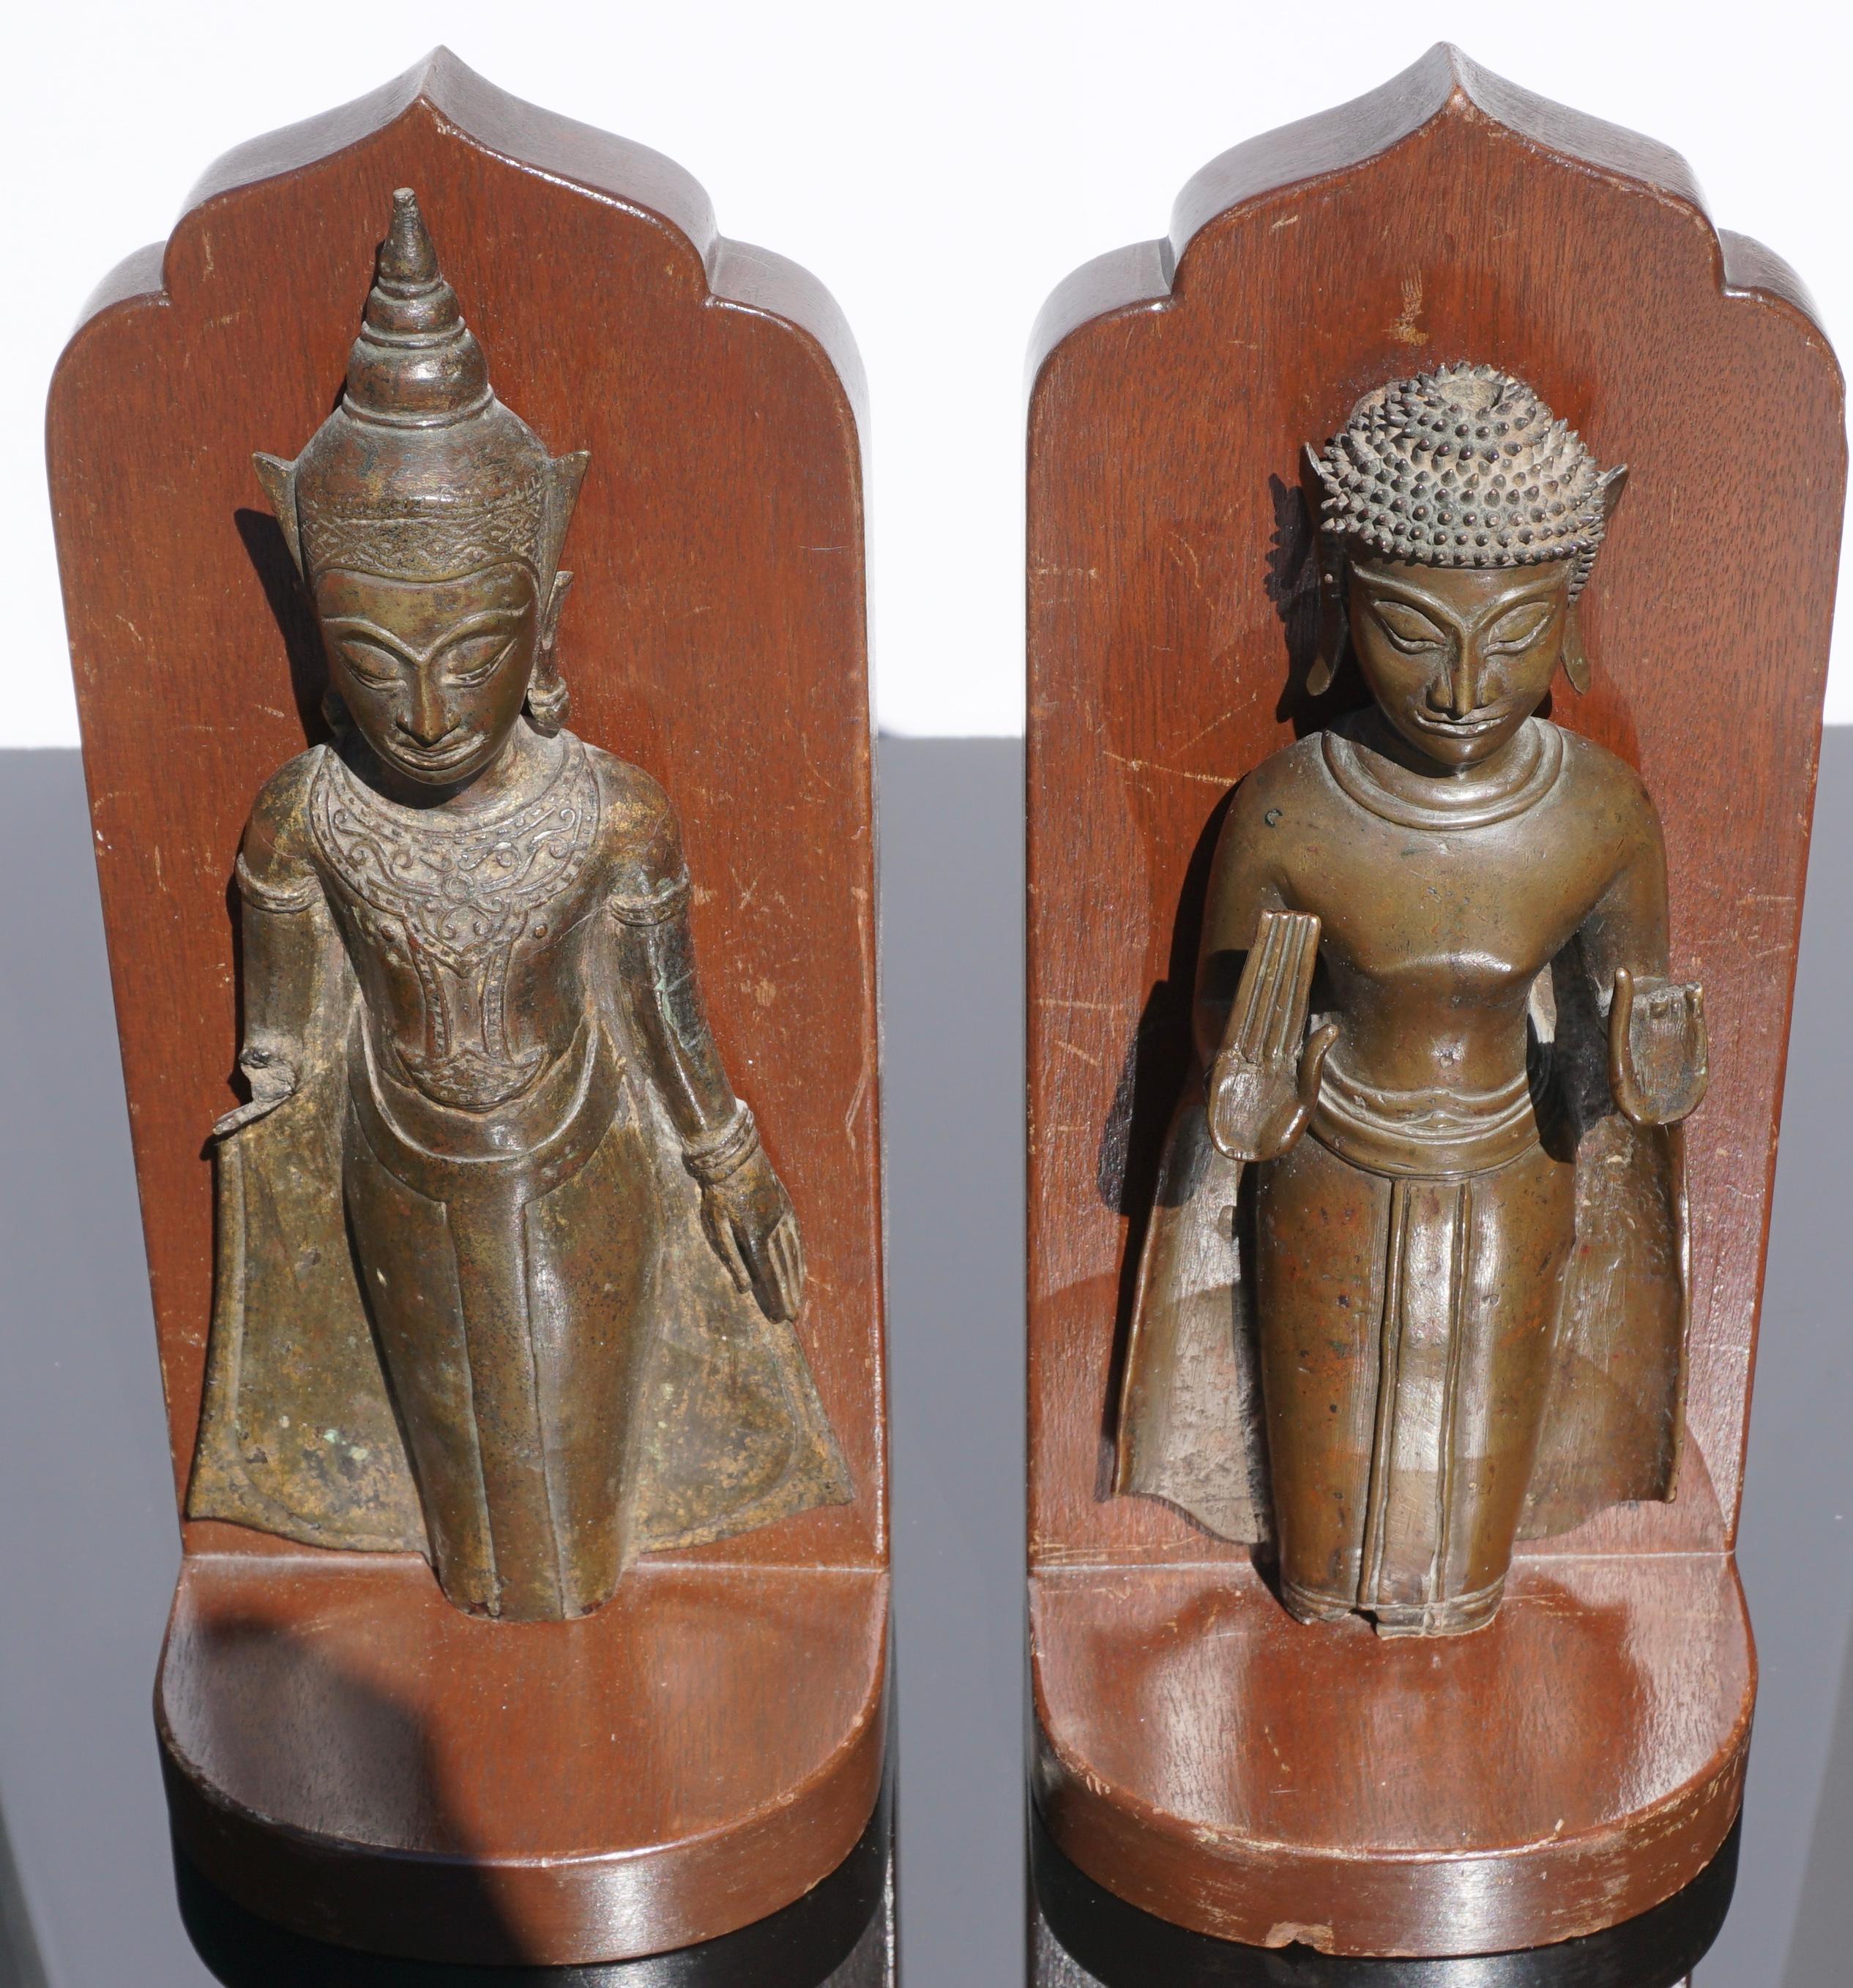 Extremely decorative; these authentic 18th century or earlier Ayutthaya period Thai bronze Buddhas were fashioned into bookends due to their losses of appendages and legs. Very detailed quality casts!

Measures: Height 11 inches (each)
Width 4.75